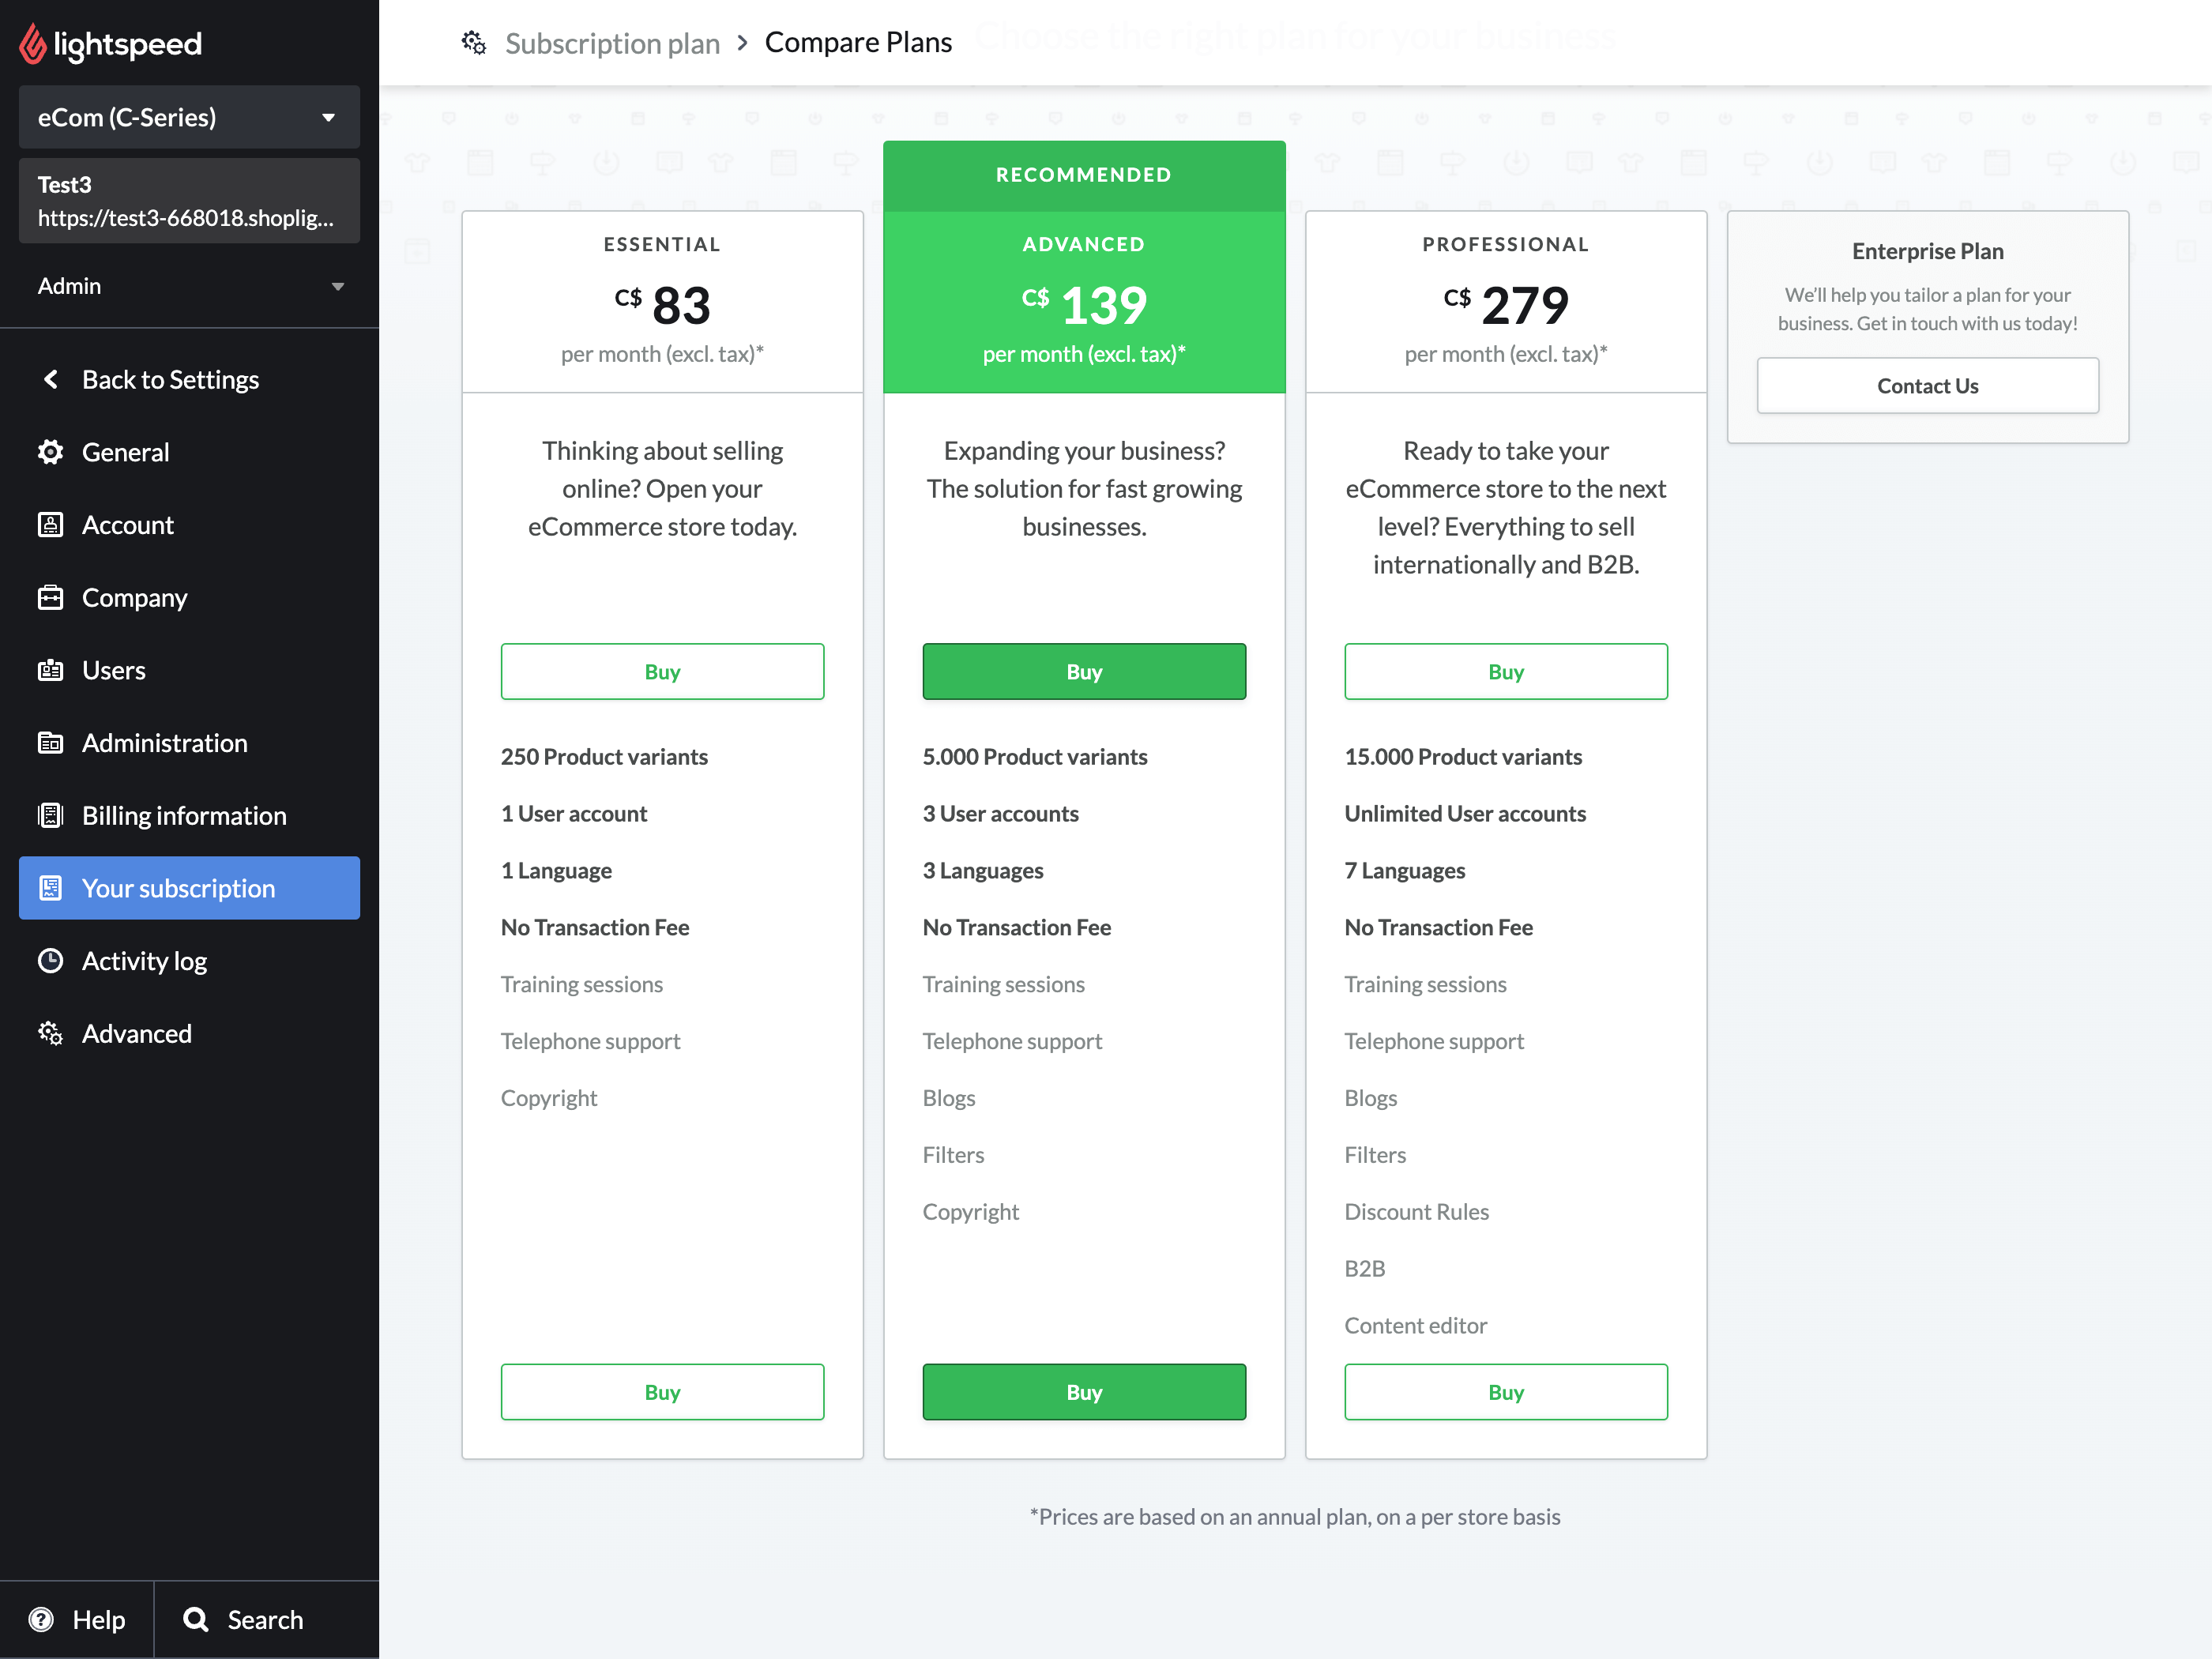 Your subscription page showing the different plans available.